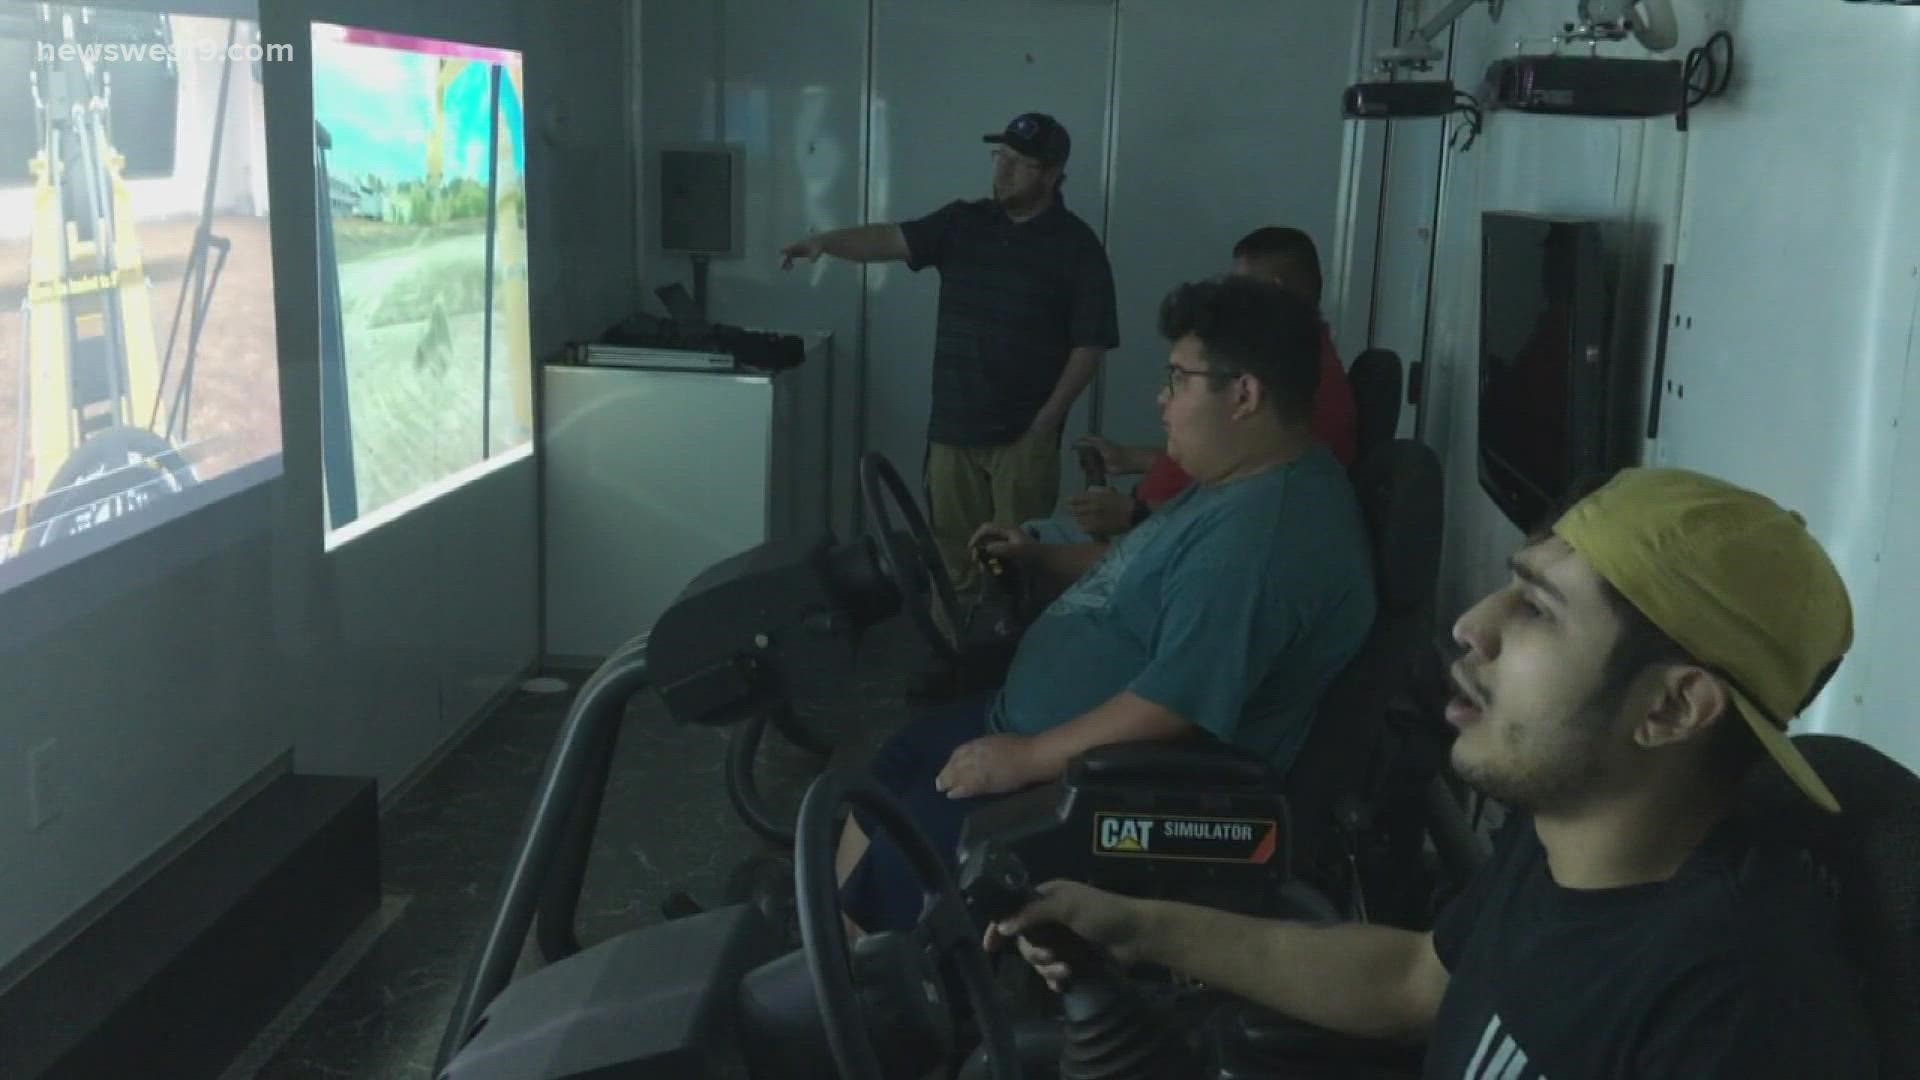 The college uses simulations to teach students how to safely and properly operate heavy machinery.